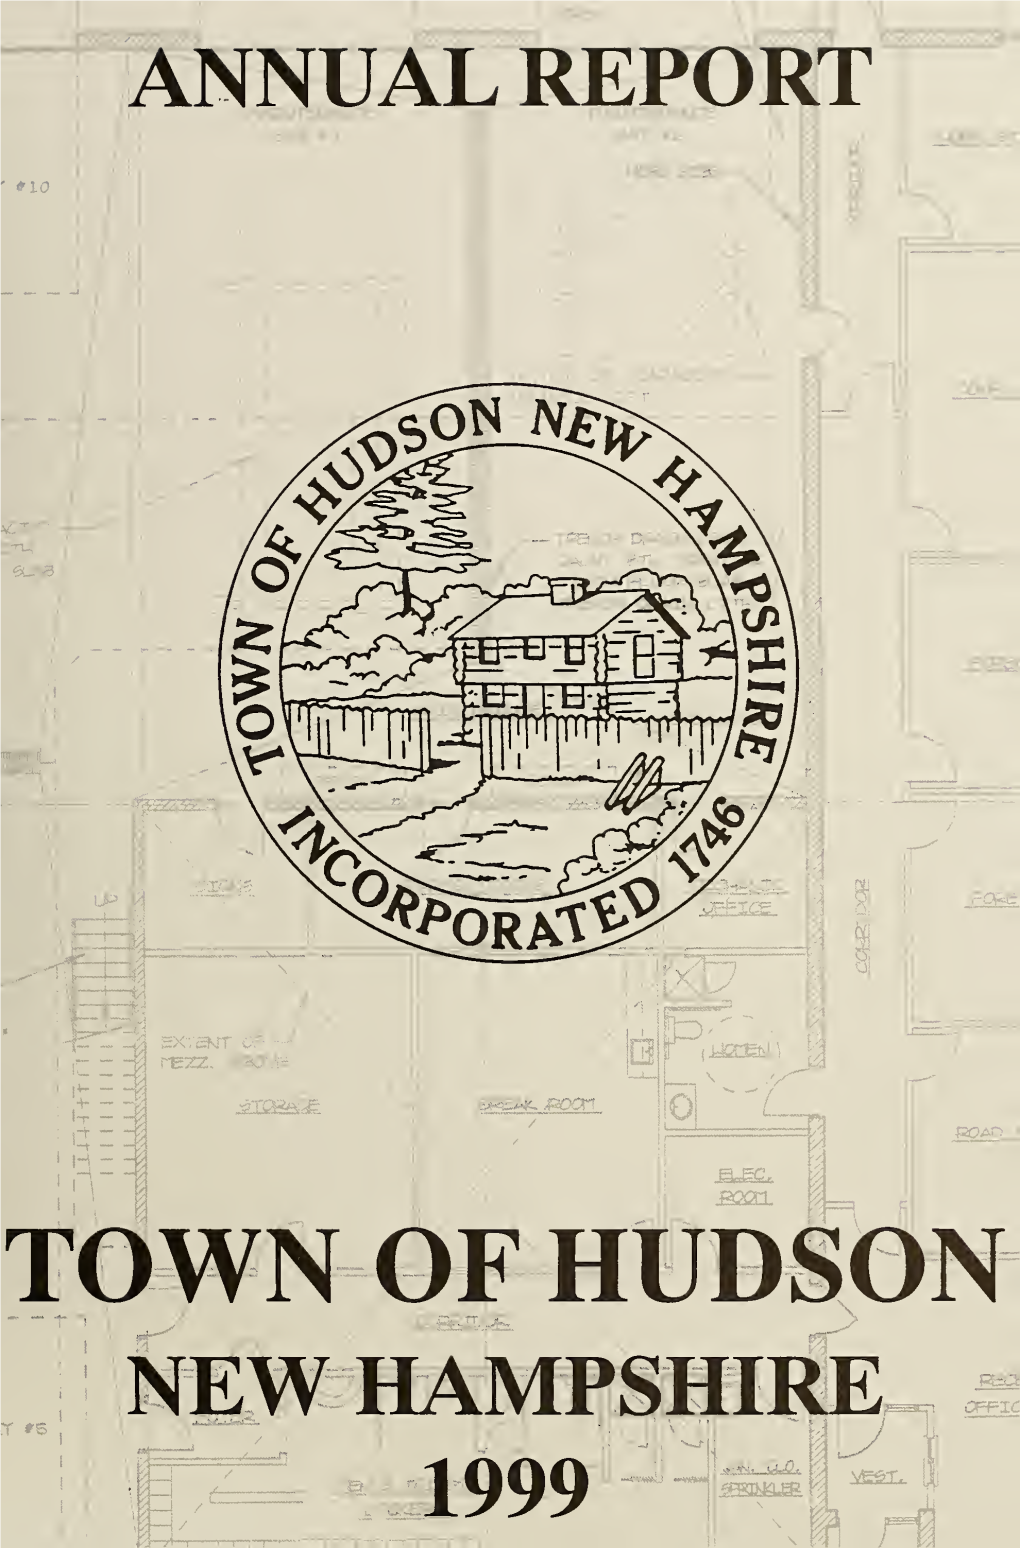 Annual Report of the Town of Hudson, New Hampshire, July 1, 1998